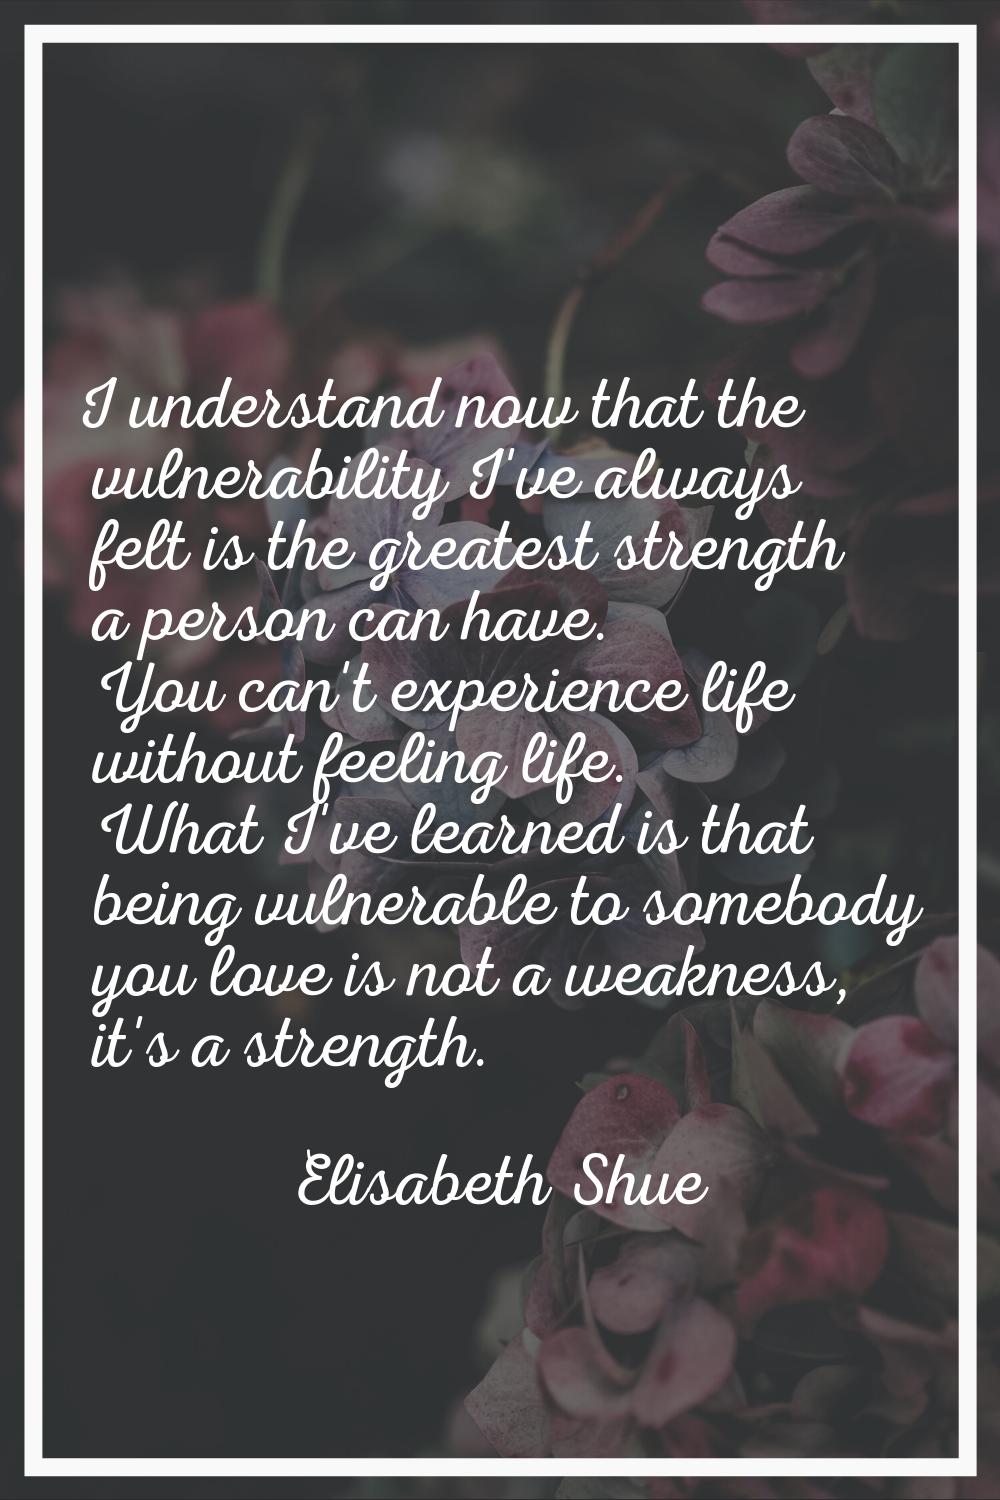 I understand now that the vulnerability I've always felt is the greatest strength a person can have